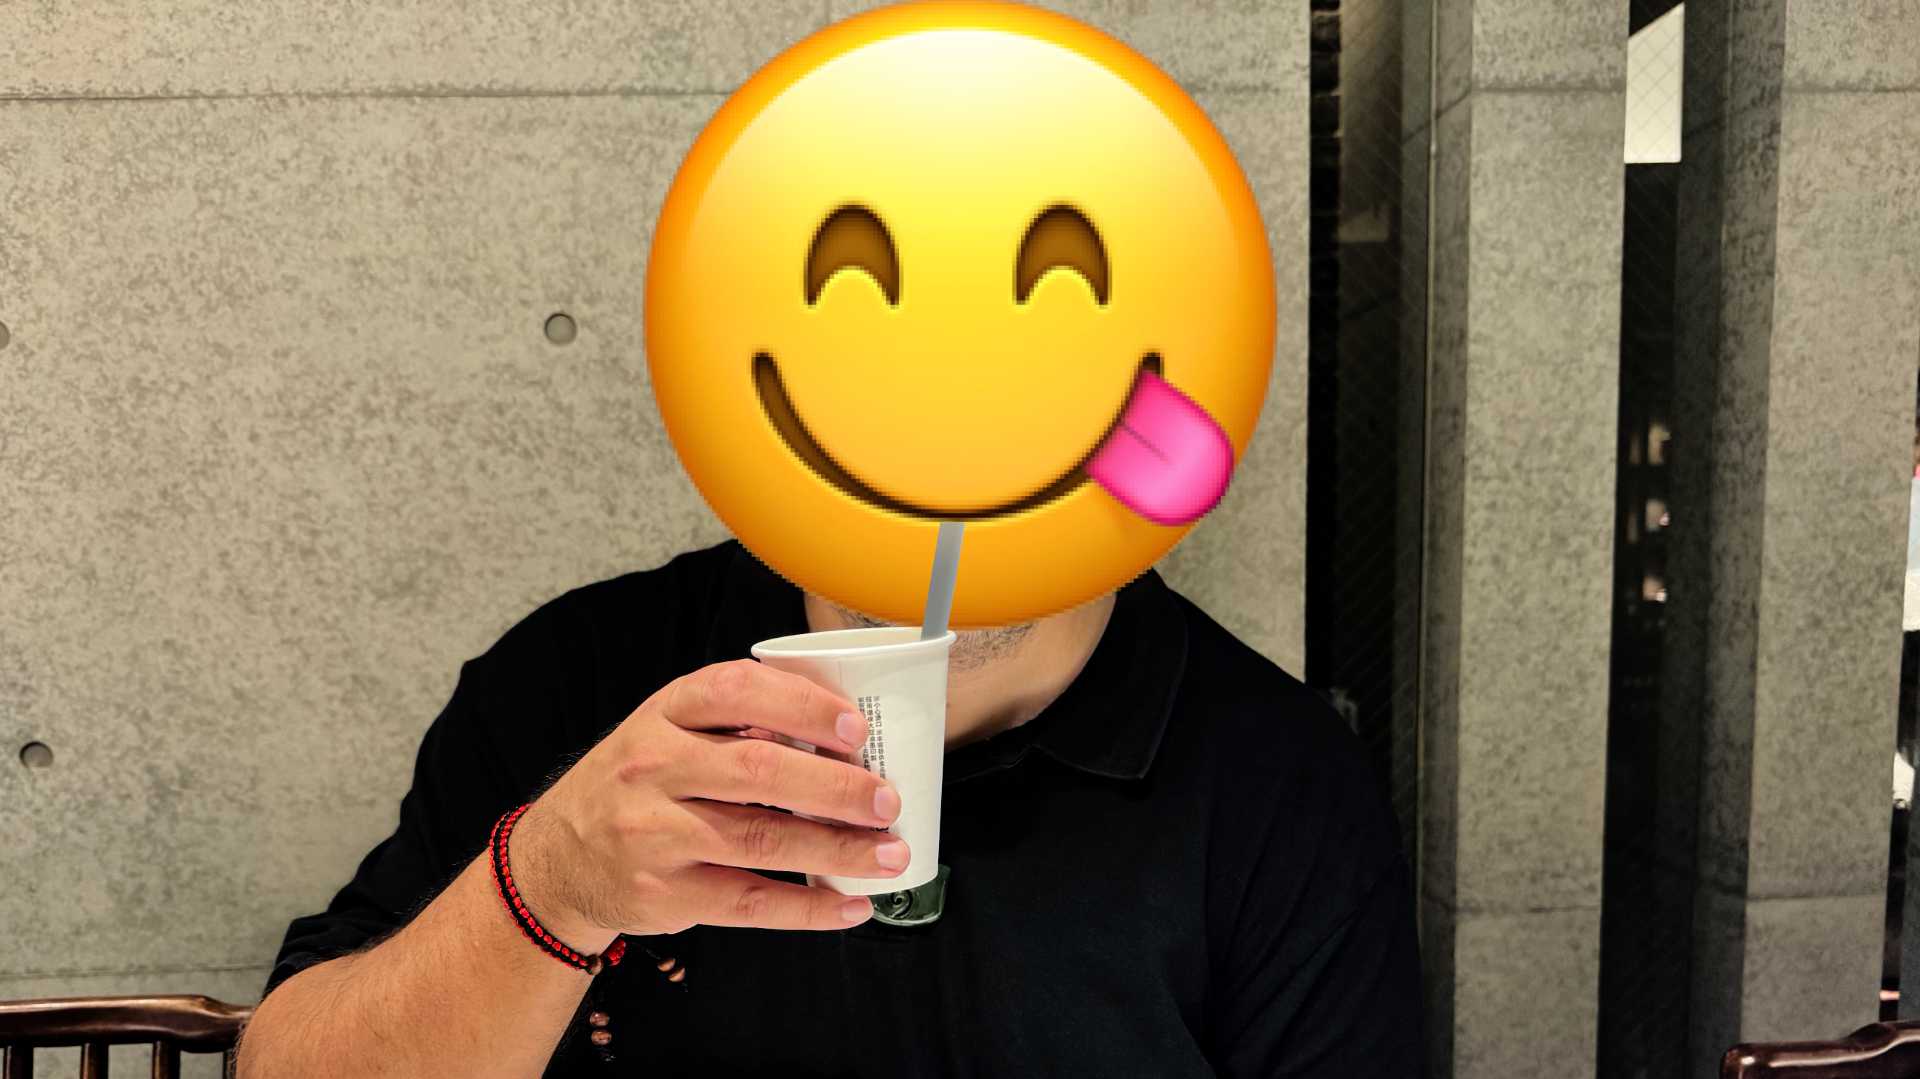 Drinking a freshly-made milk bubble tea through a straw. The person's face is obscured by a licking-their-lips emoji.